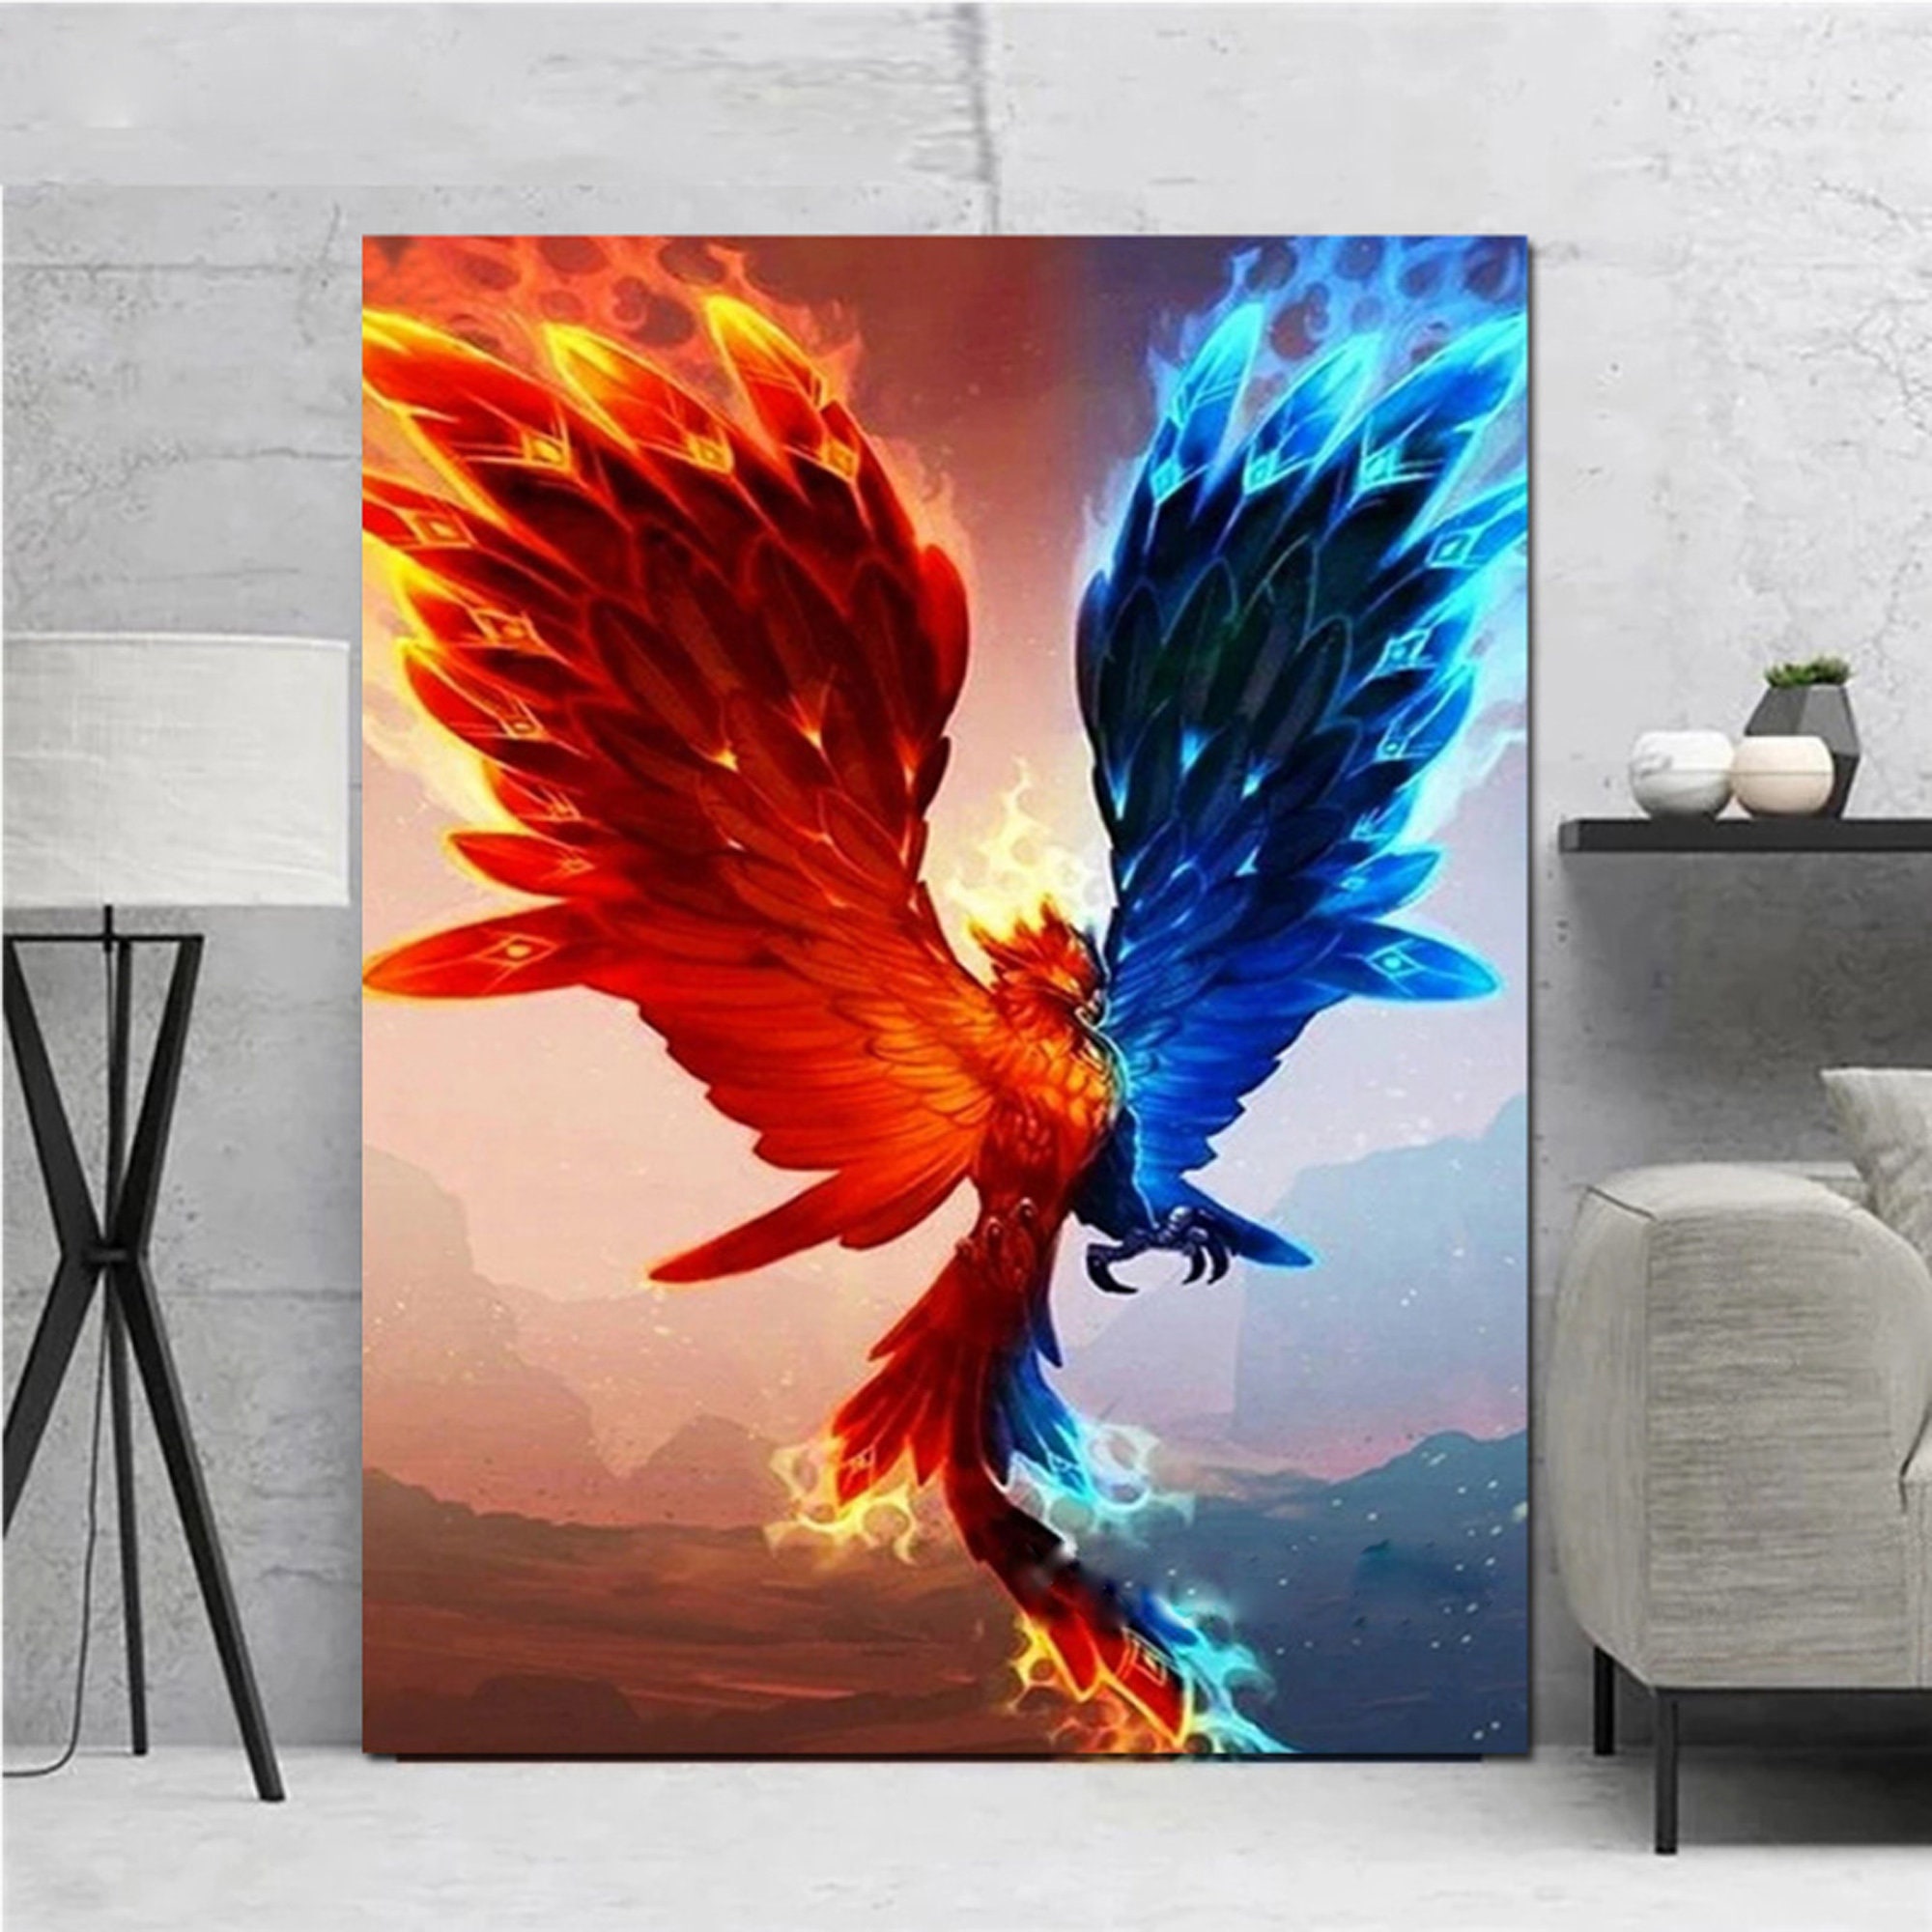 Stones 5D DIY Diamond Painting Kits Cross Stitch Full Diamond Embroidery  Kit Game Of Thrones Picture For Room Decoration : : Home & Kitchen